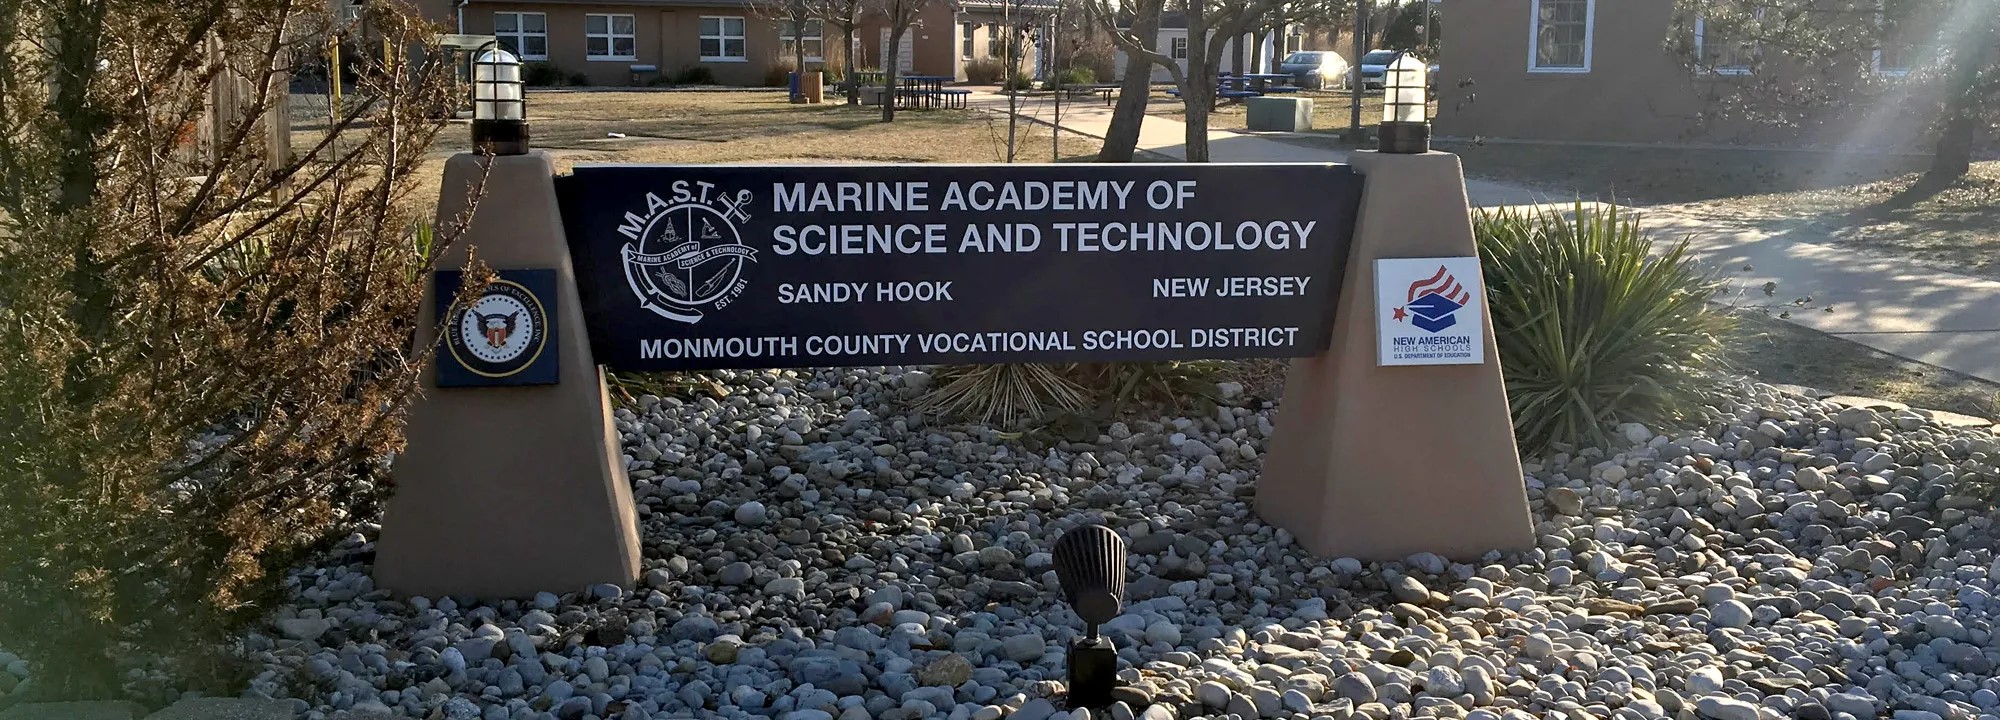 Marine Academy of Science & Technology Building